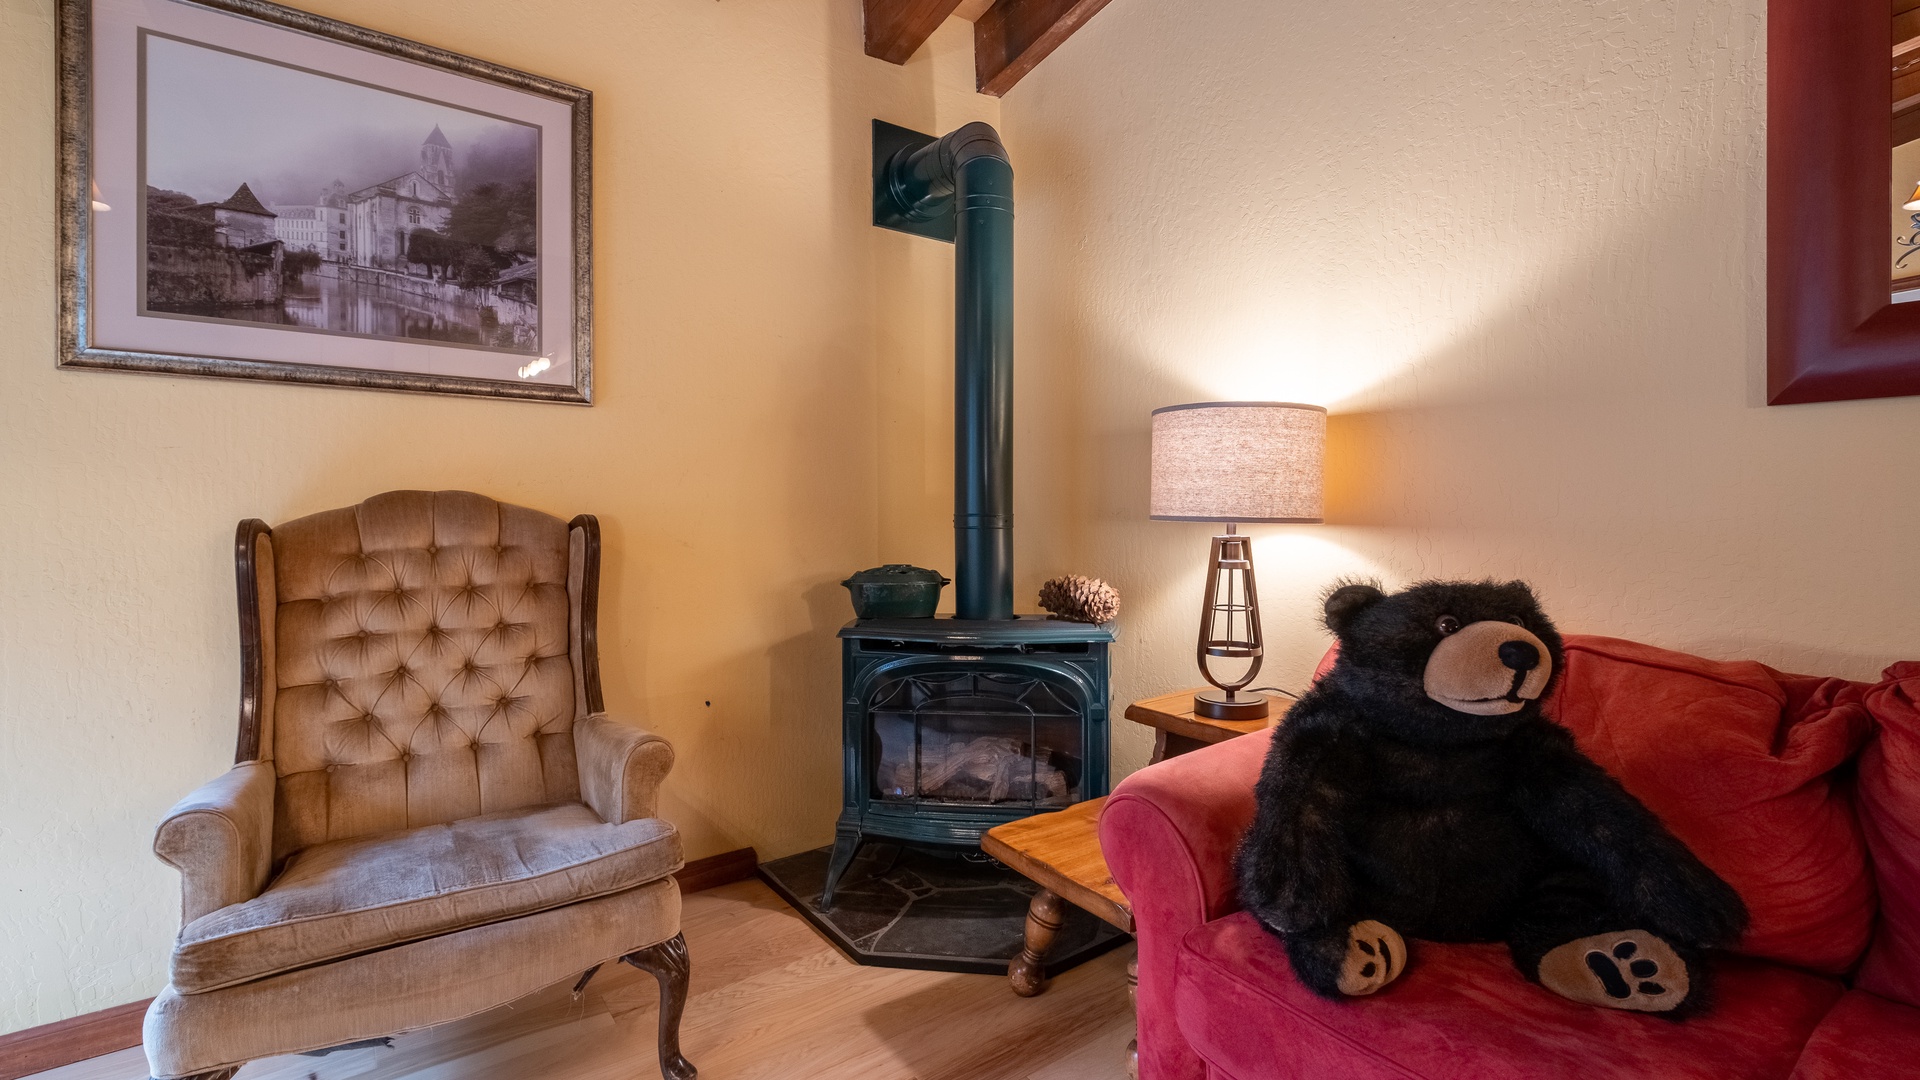 Lounge Room Fire Place: Tahoe Donner Vacation Lodge